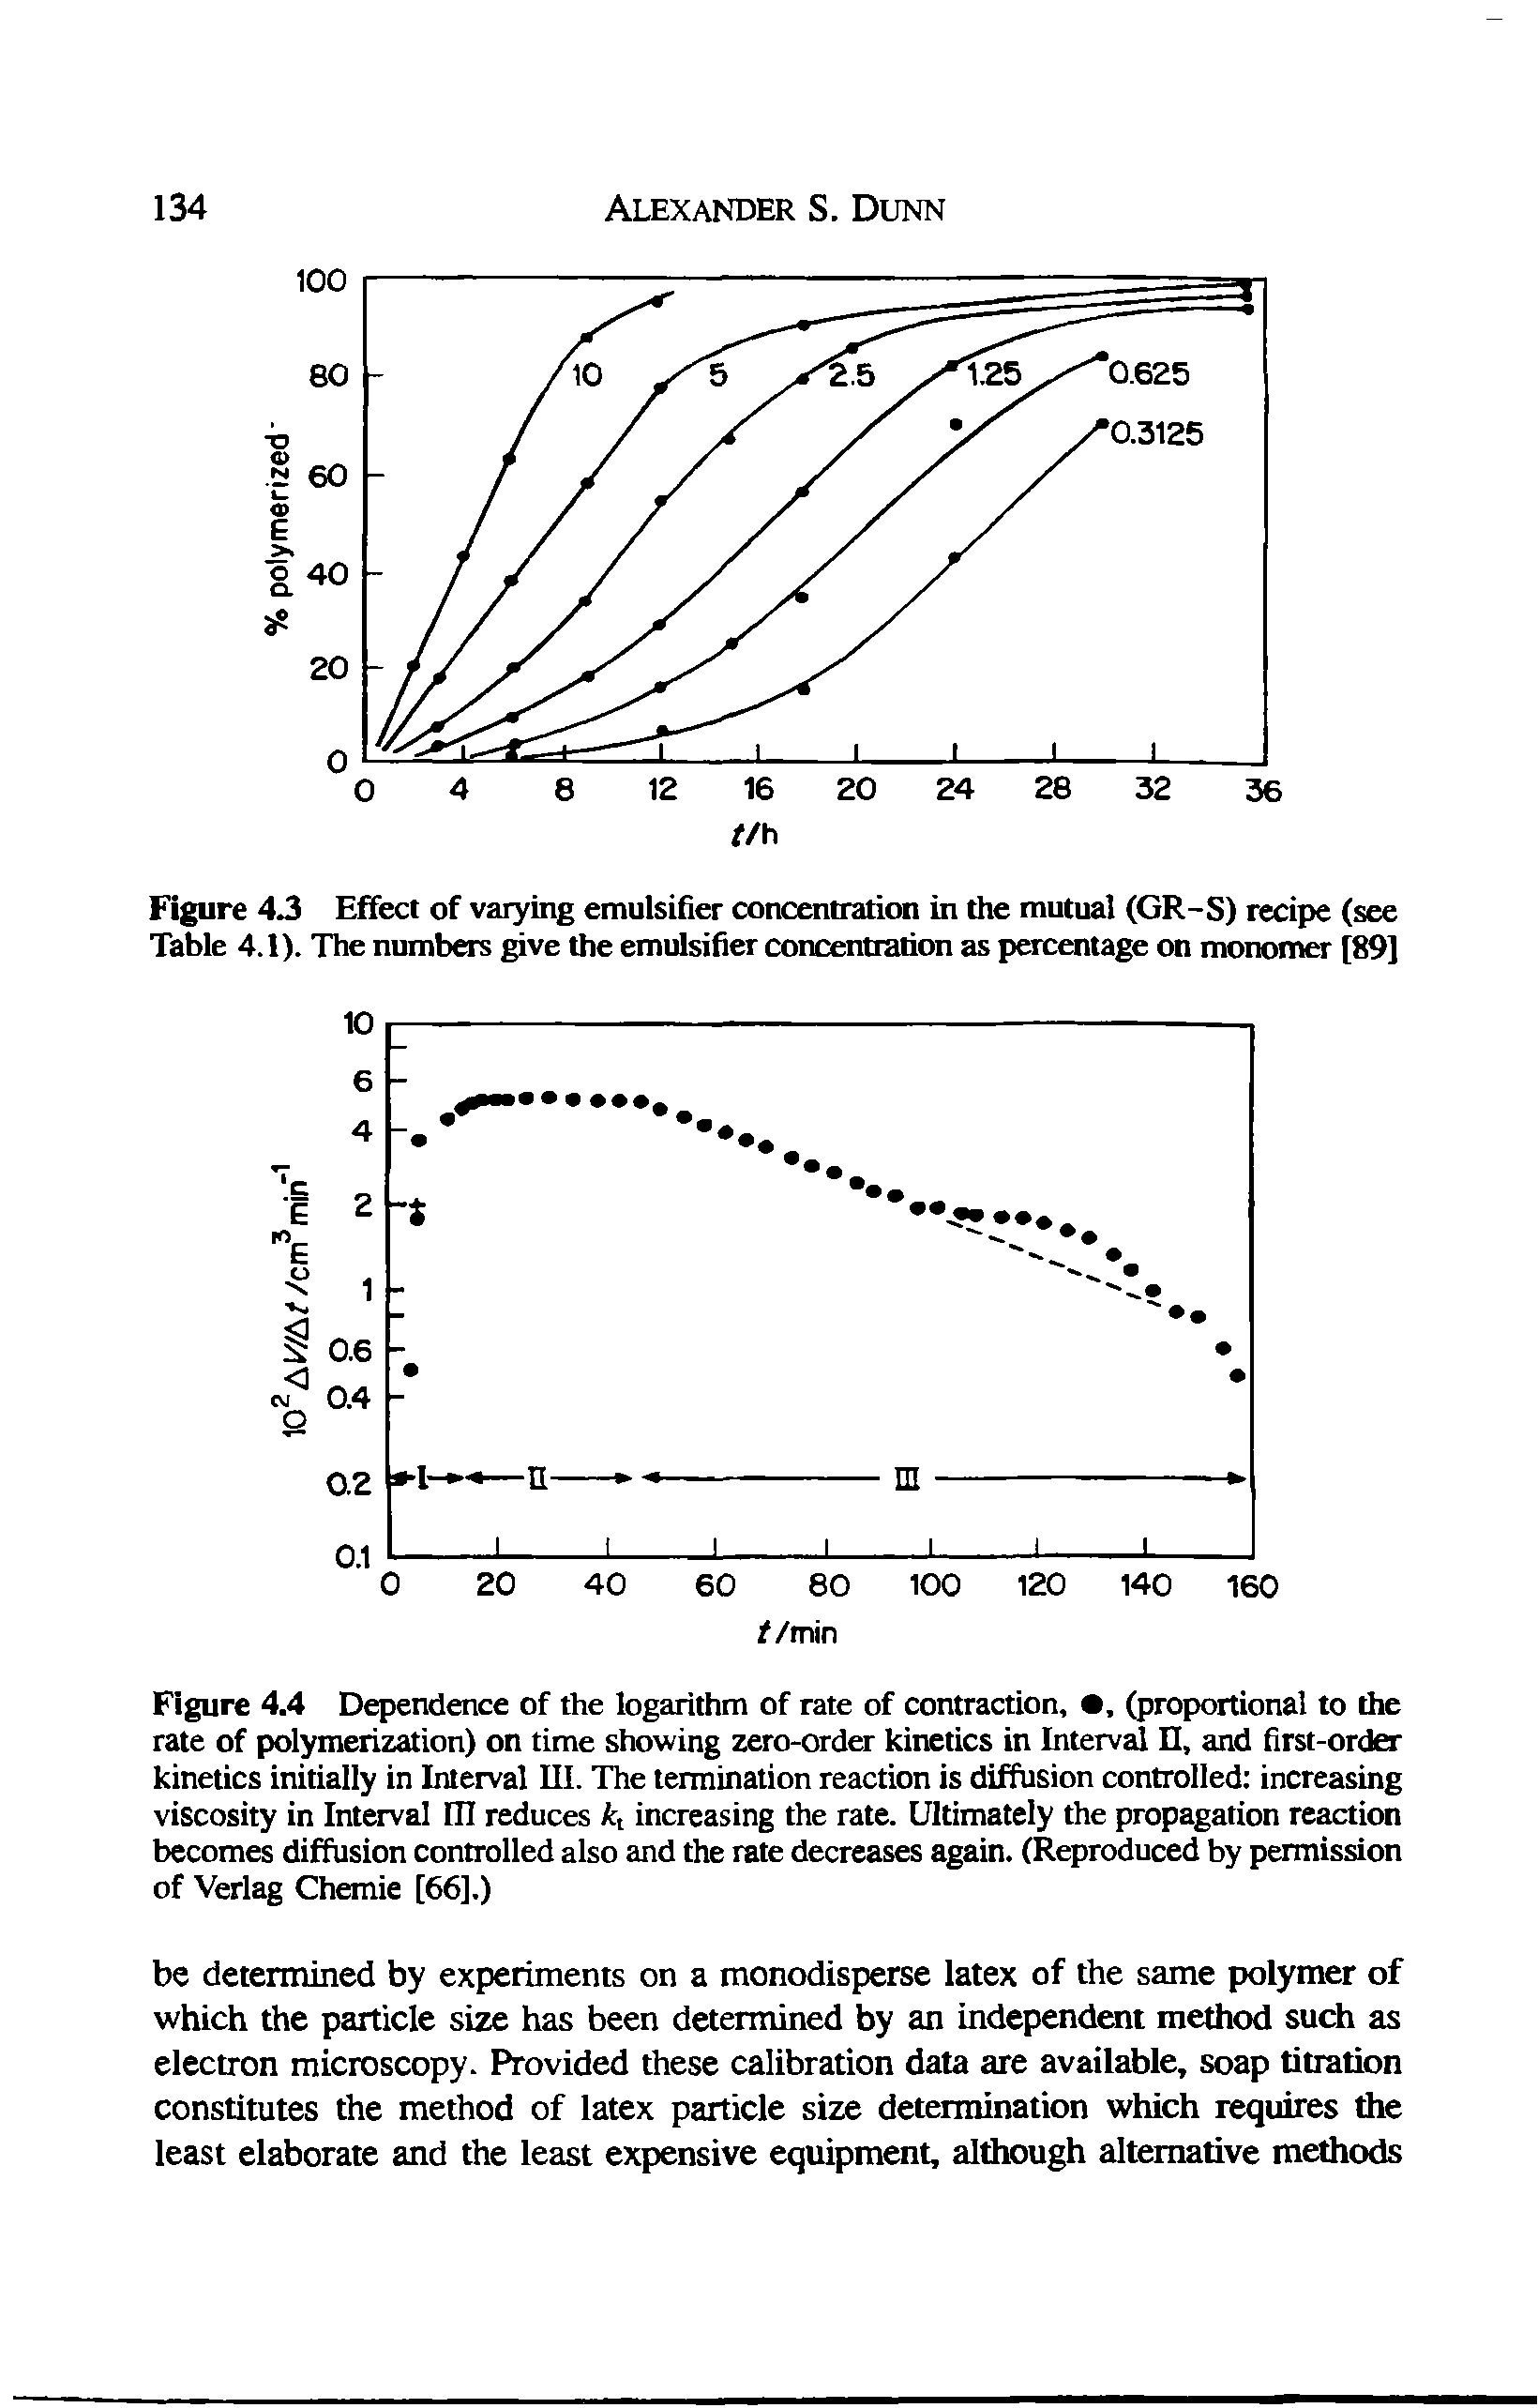 Figure 4.4 Dependence of the logarithm of rate of contraction, . (proportional to the rate of polymerization) on time showing zero-order kinetics in Interval n, and first-order kinetics initially in Interval III. The termination reaction is diffusion controlled increasing viscosity in Intoval HI reduces ki increasing the rate. Ultimately the propagation reaction becomes diffusion controlled also and the rate decreases again. (Reproduced by permission of Verlag Chemie [66].)...